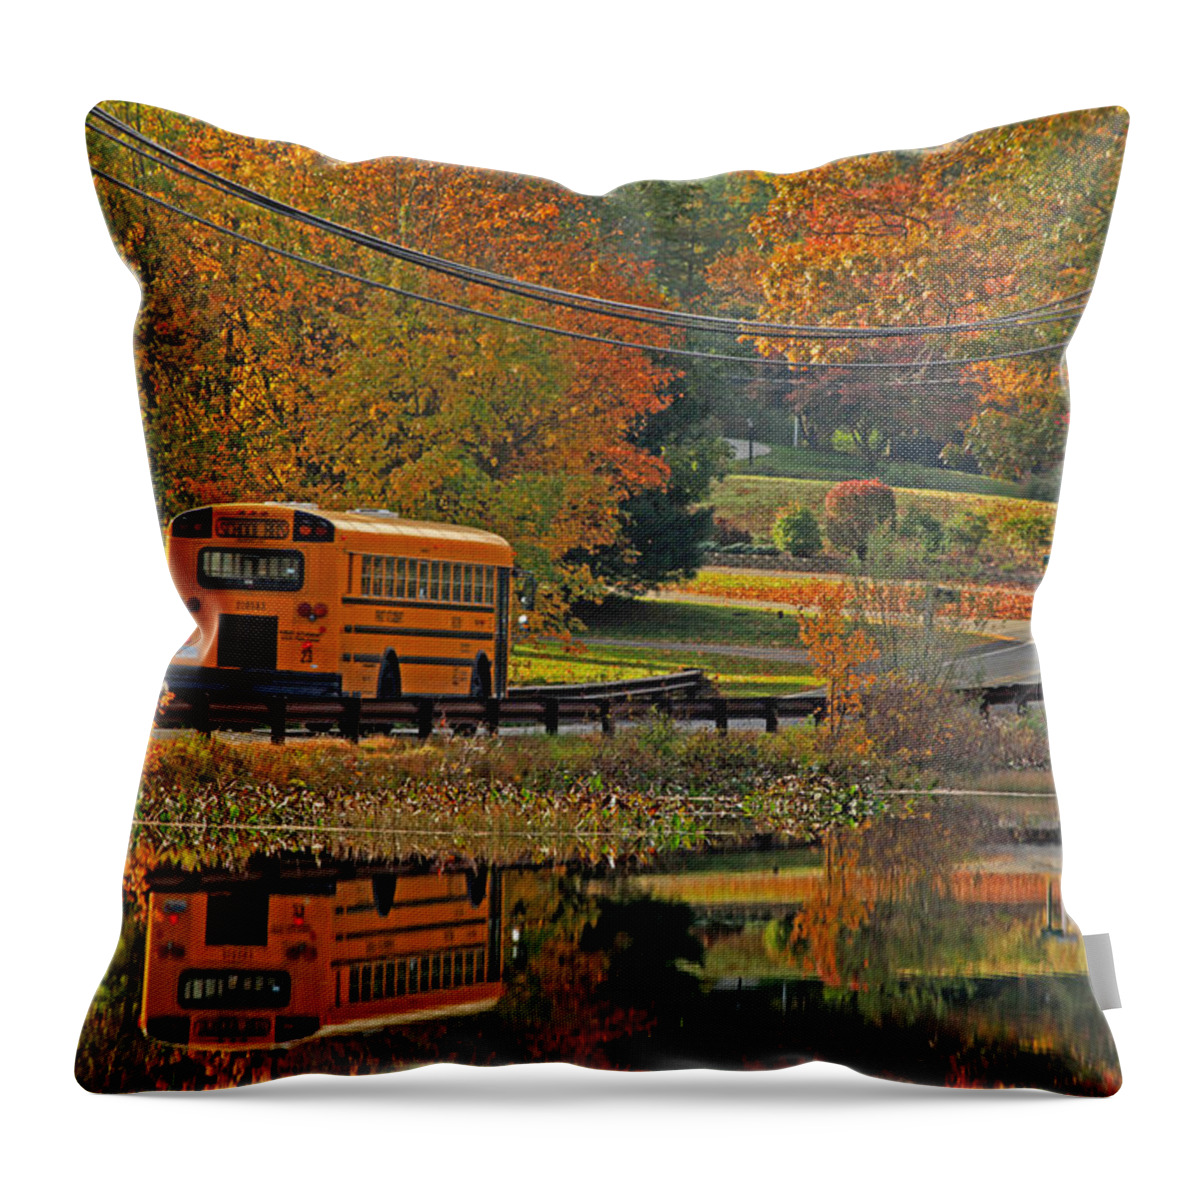 School Days Throw Pillow featuring the photograph School Days of Autumn by Karol Livote